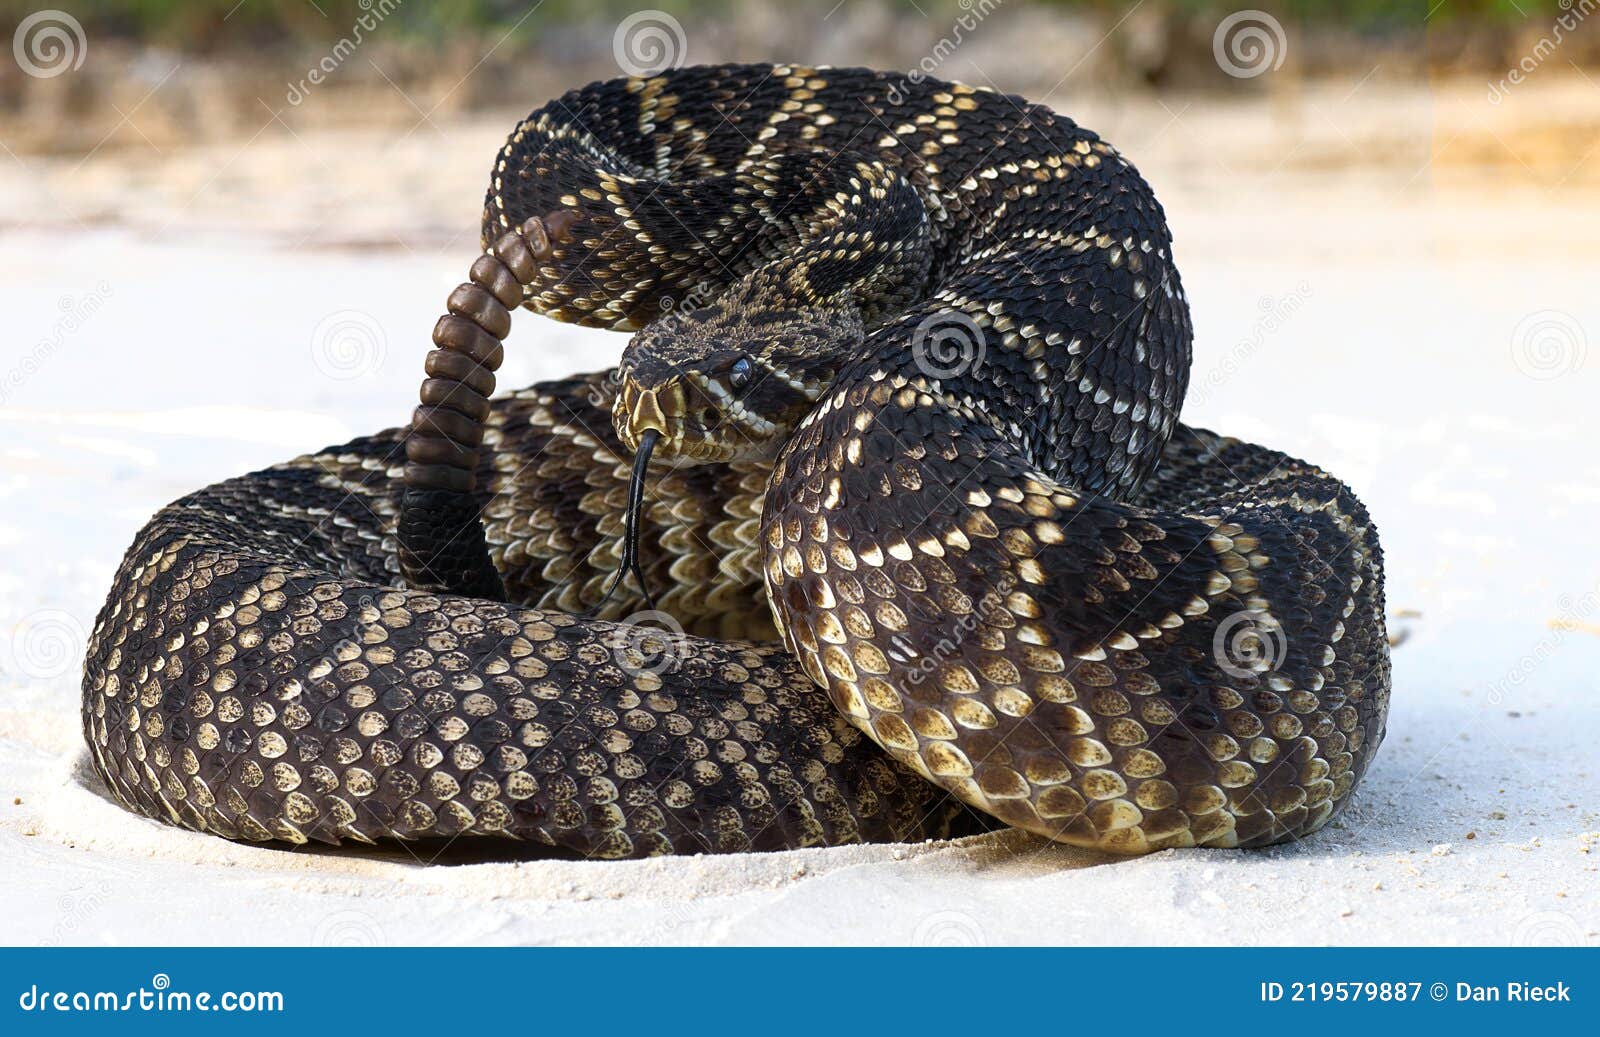 eastern diamond back rattlesnake crotalus adamanteus coiled in defensive strike pose with tongue out